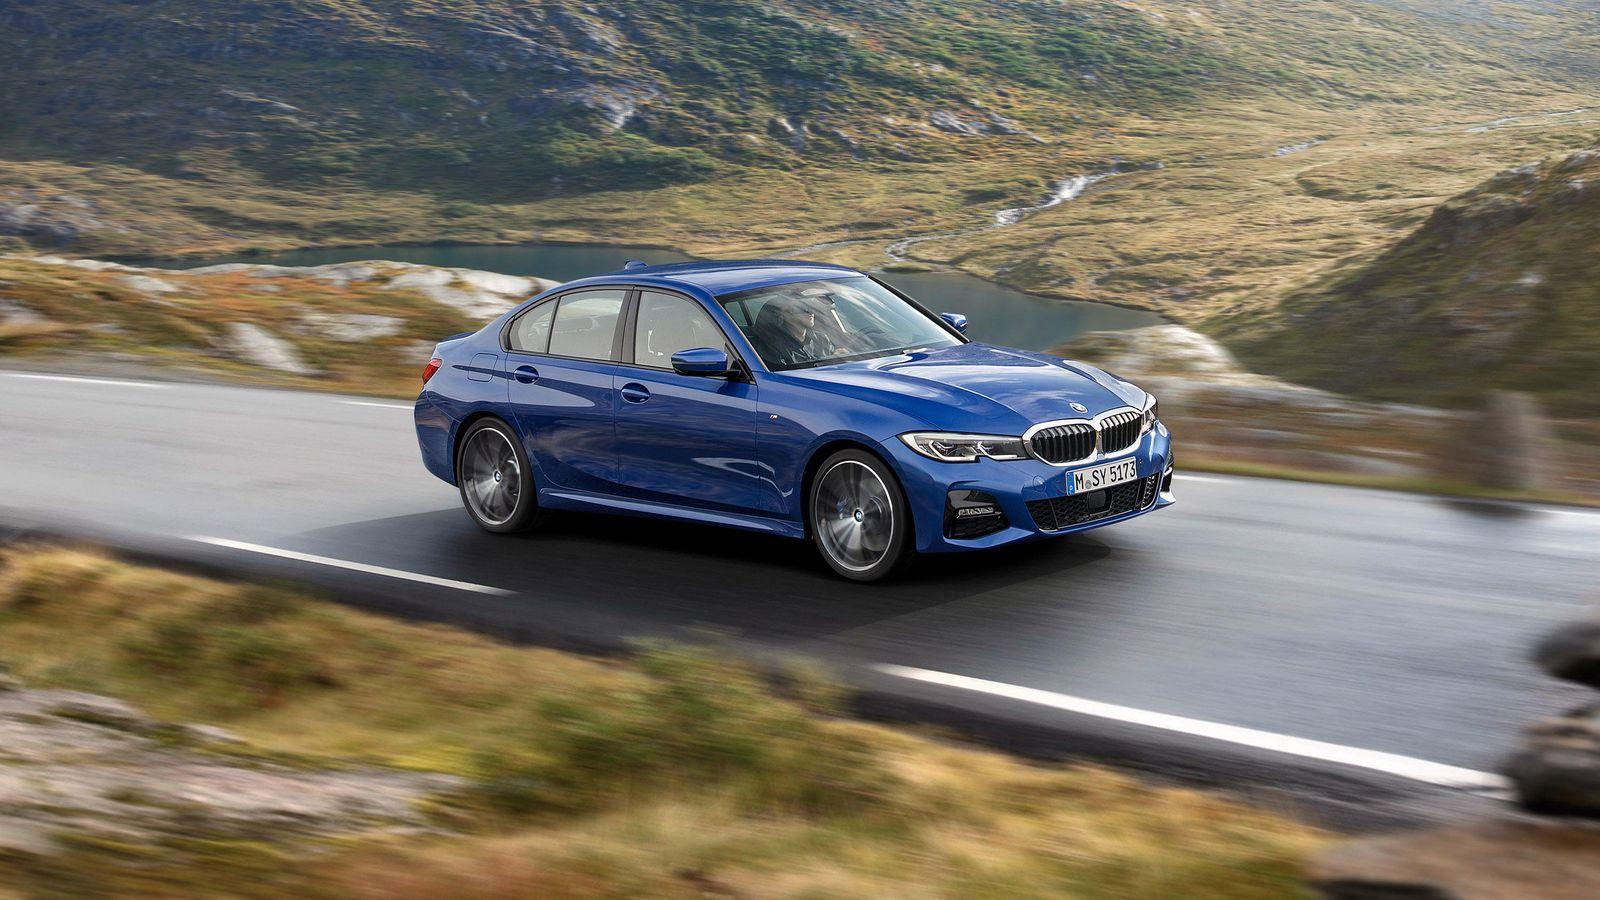 BMW 3 Series gets trick chassis and iDrive tech, $200 price